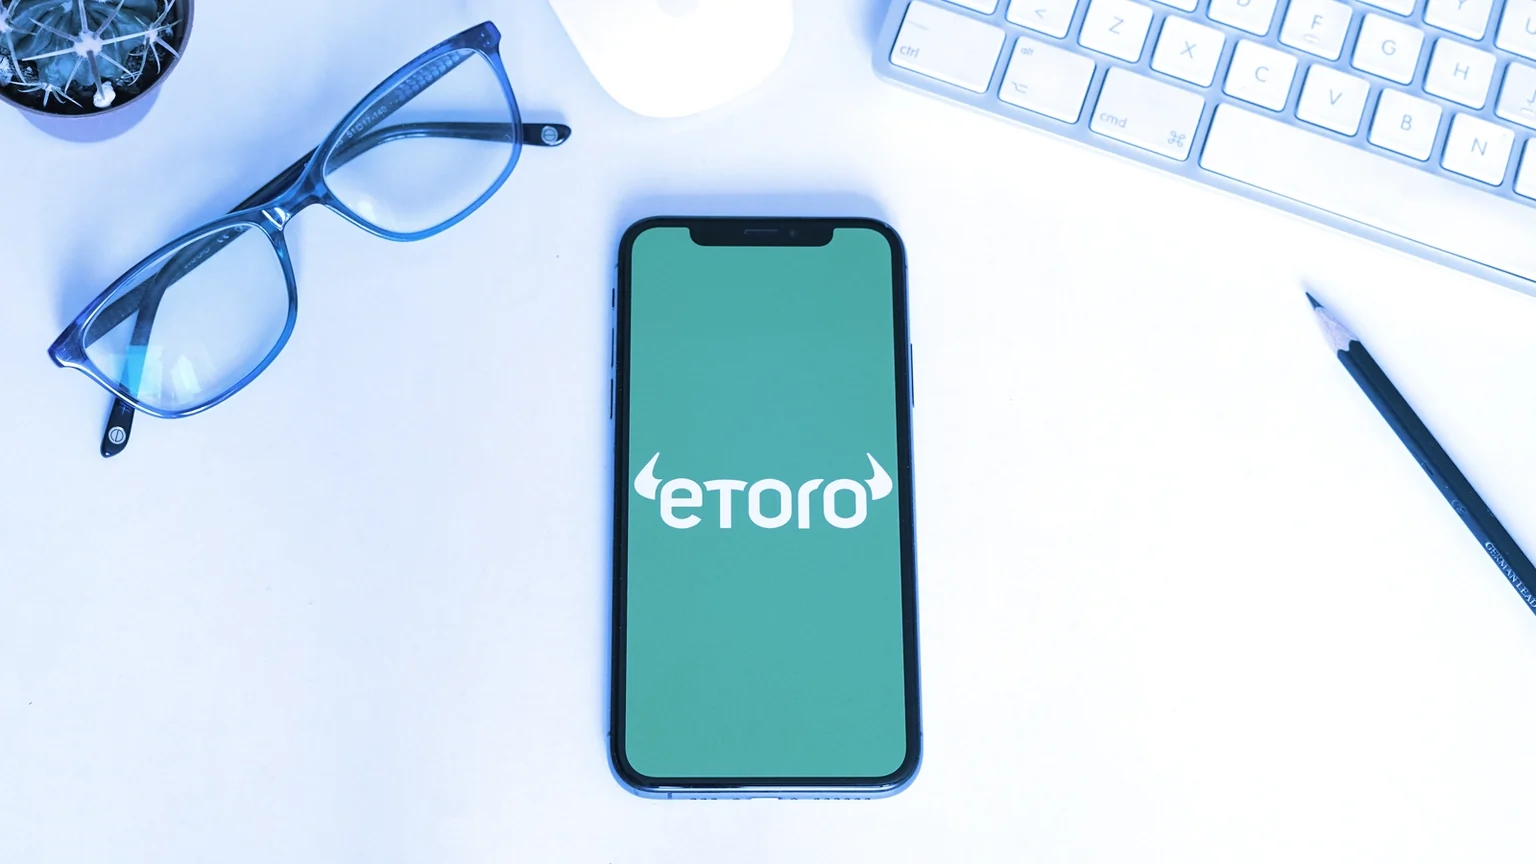 eToro is a trading platform that lets investors buy stocks and cryptocurrencies. Image: Shutterstock